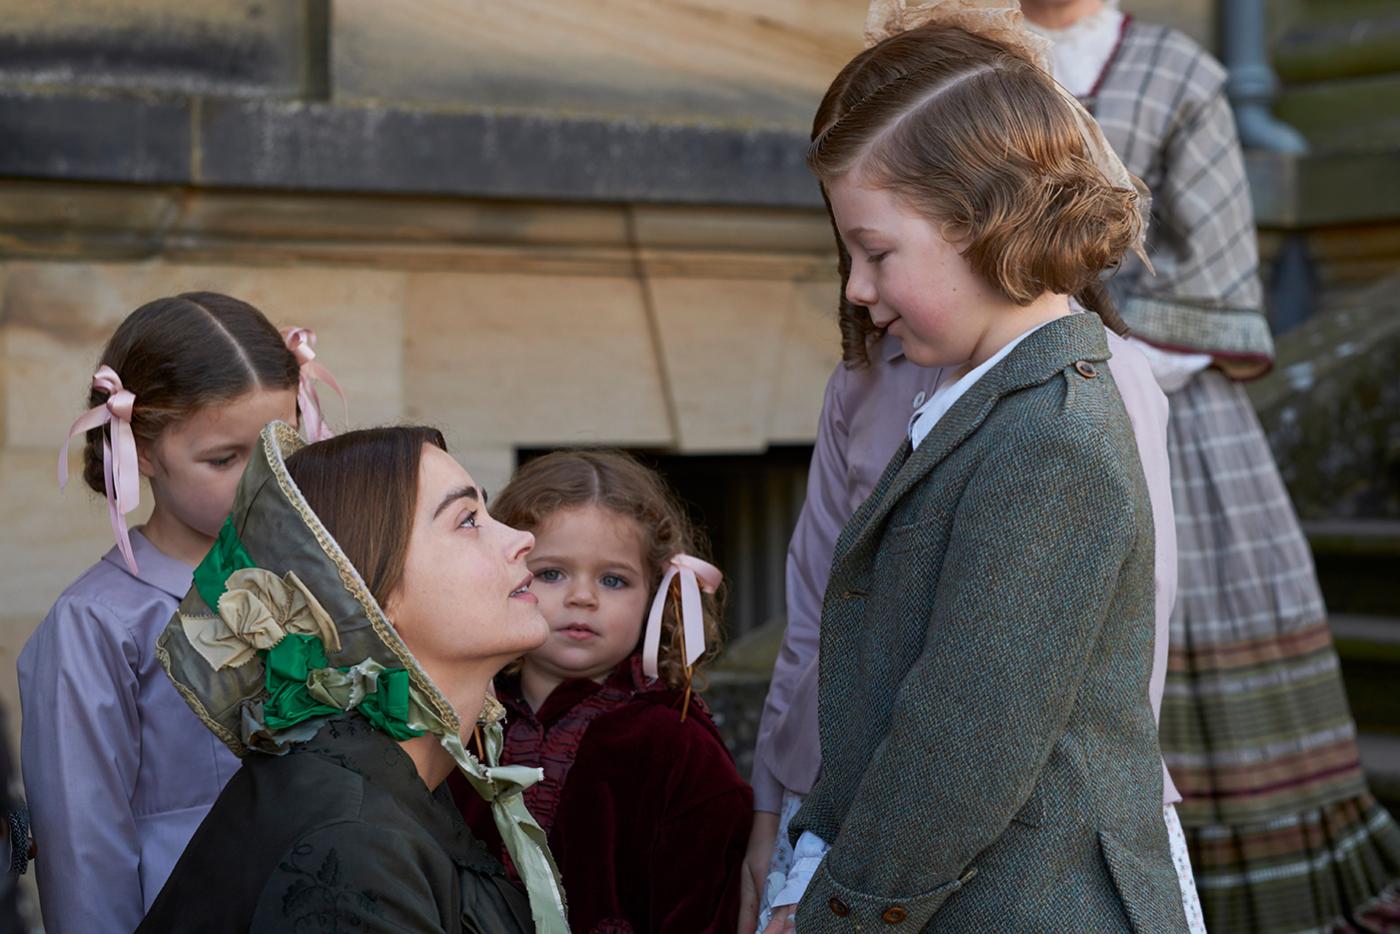 Victoria and her son Bertie. Photo: Justin Slee/ITV Plc for MASTERPIECE